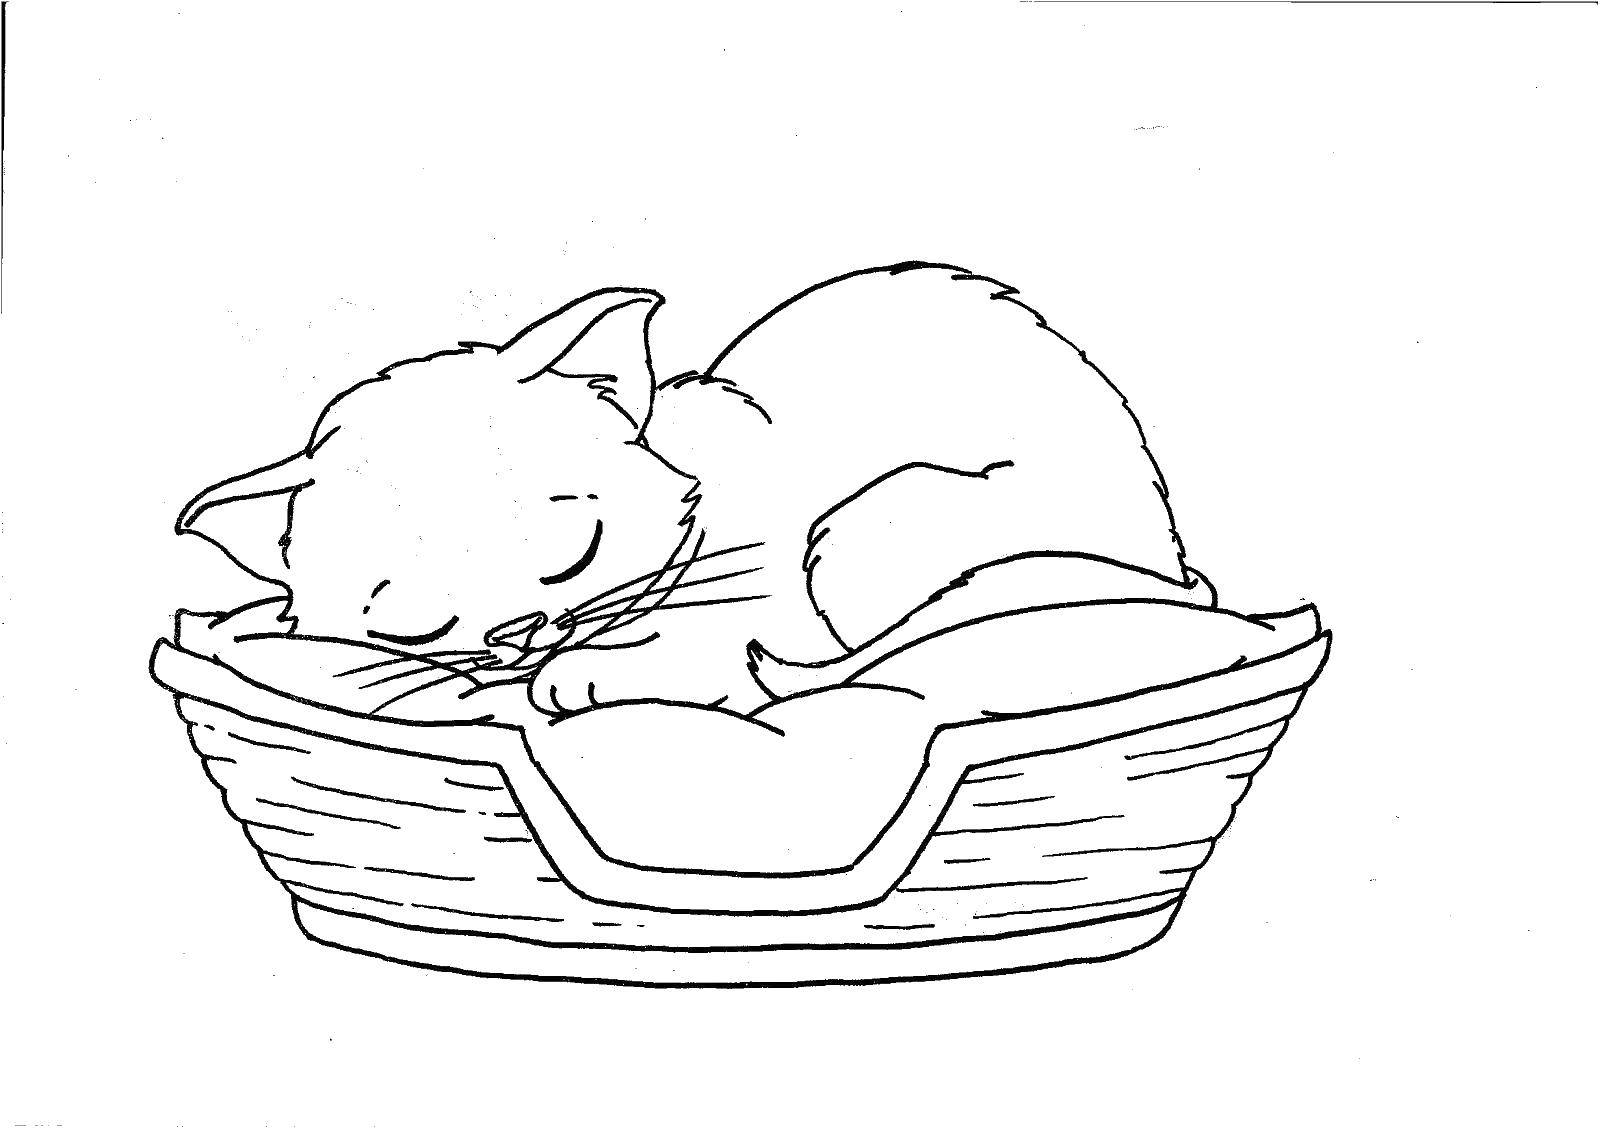 Coloring Kitten sleeping in the crib. Category Cats and kittens. Tags:  kitty, cat.